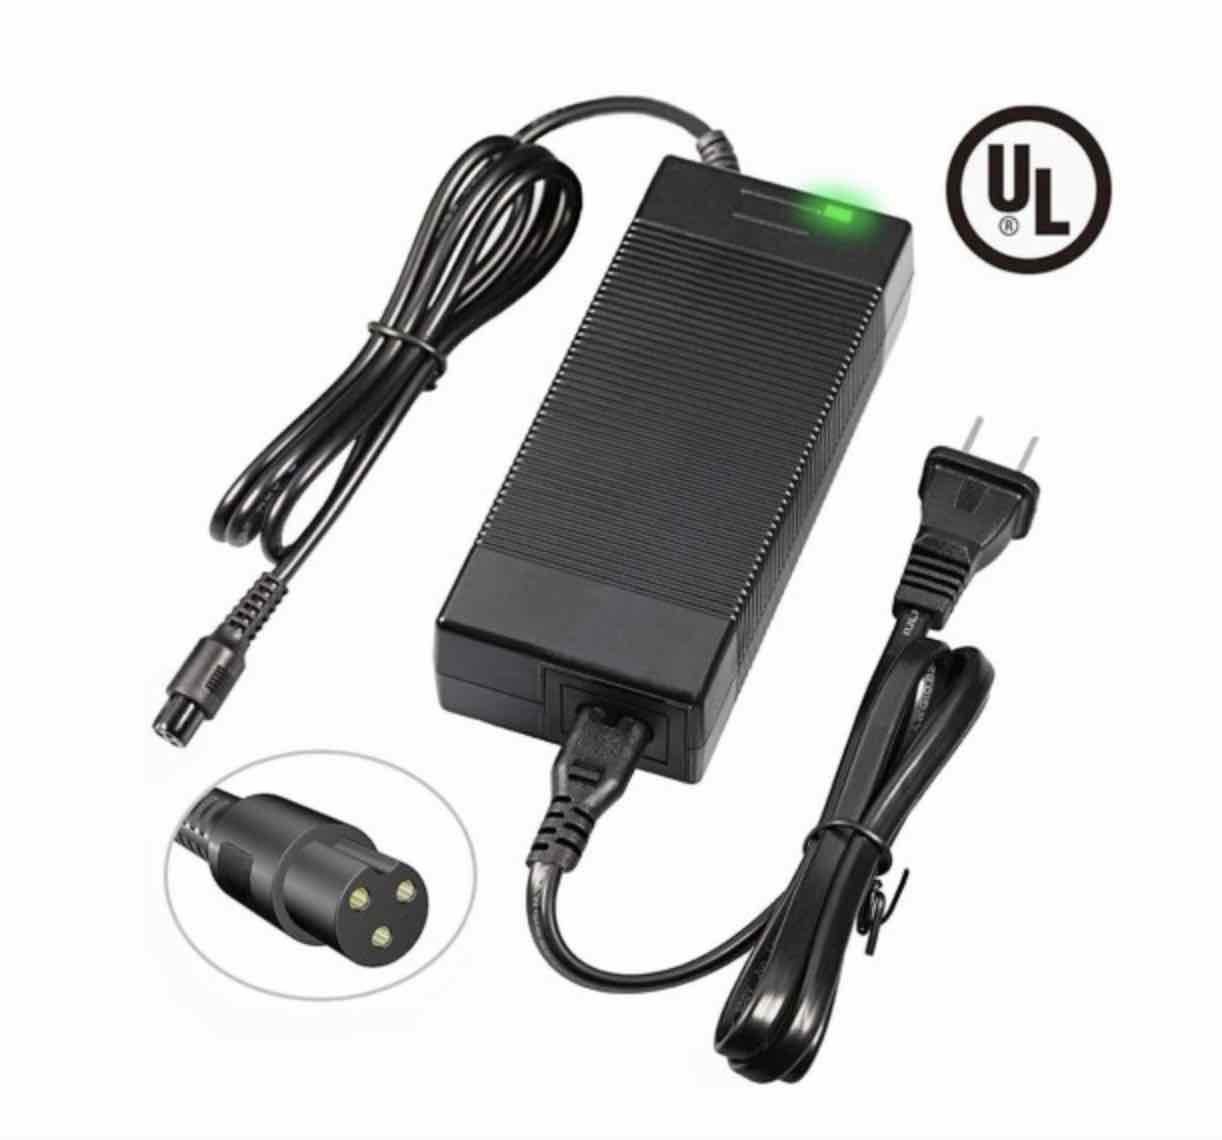 UL certified charger